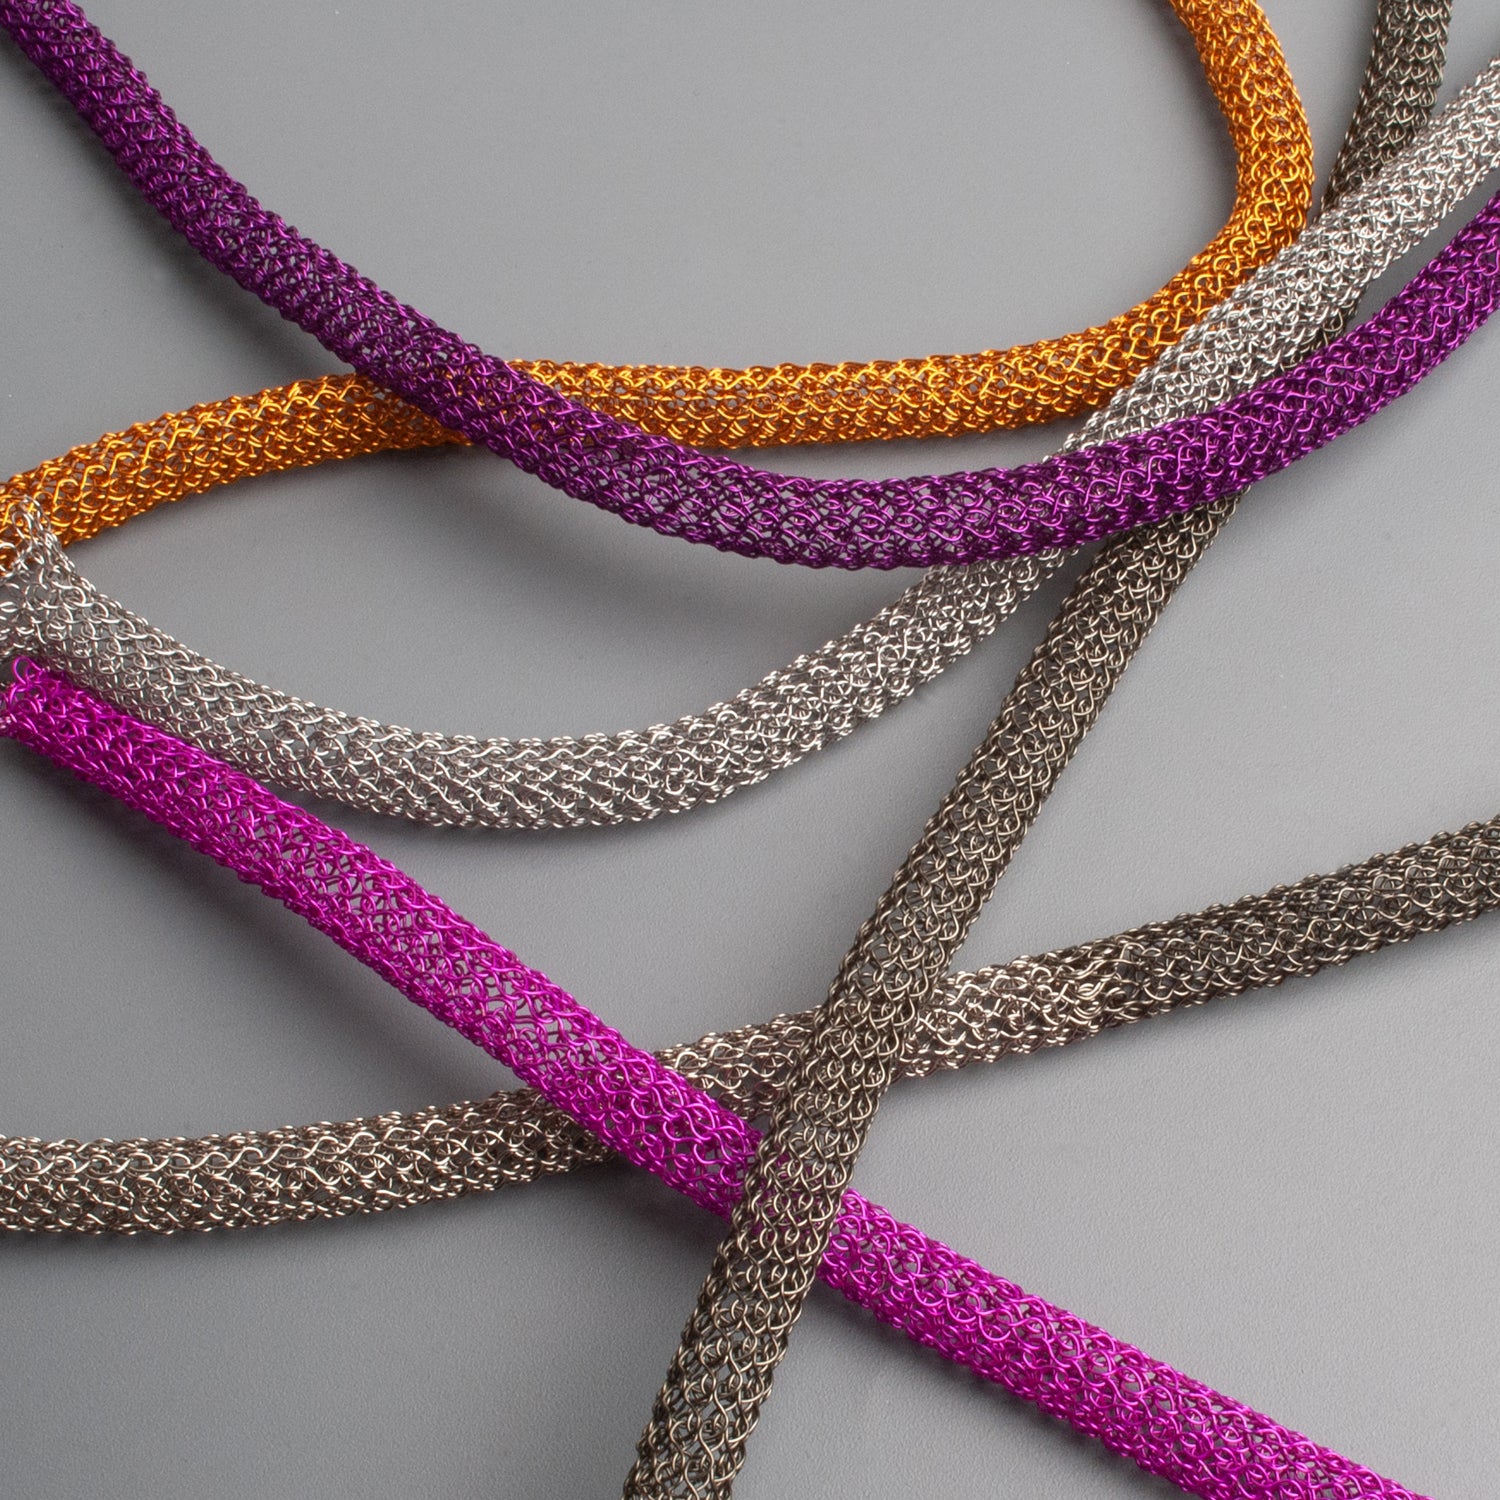 Knitted tubes - Wire tubes - Mesh tubes - Wire cords - made of